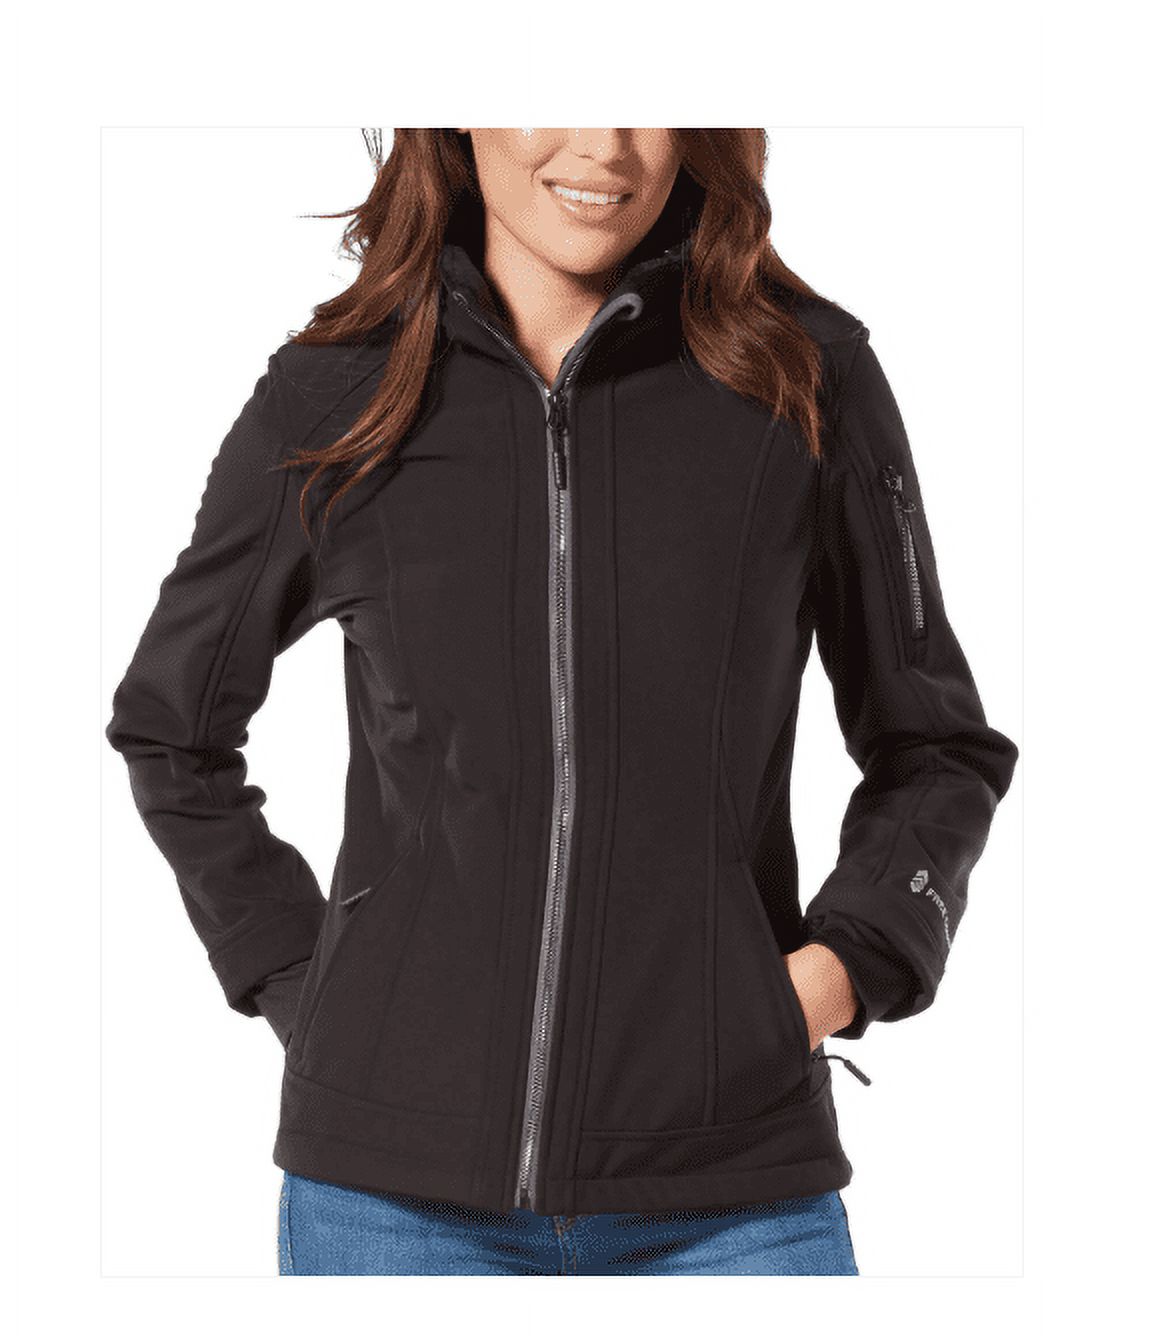 Free Country Women's Super Softshell Jacket with Faux Fur Inner Lining (Black, XXL) - image 1 of 2